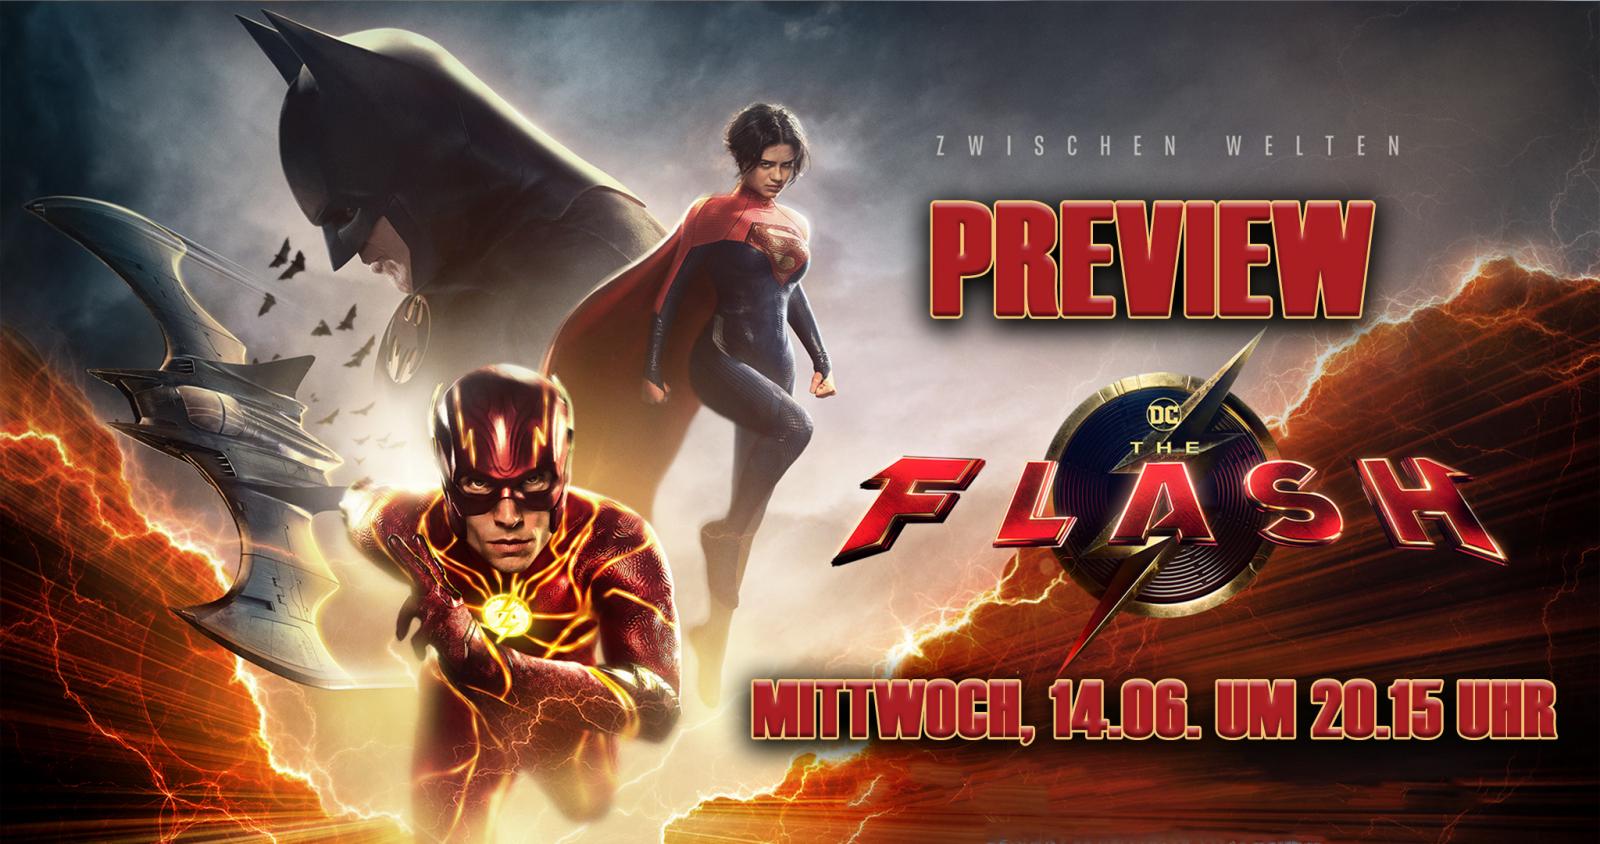 Preview: The Flash